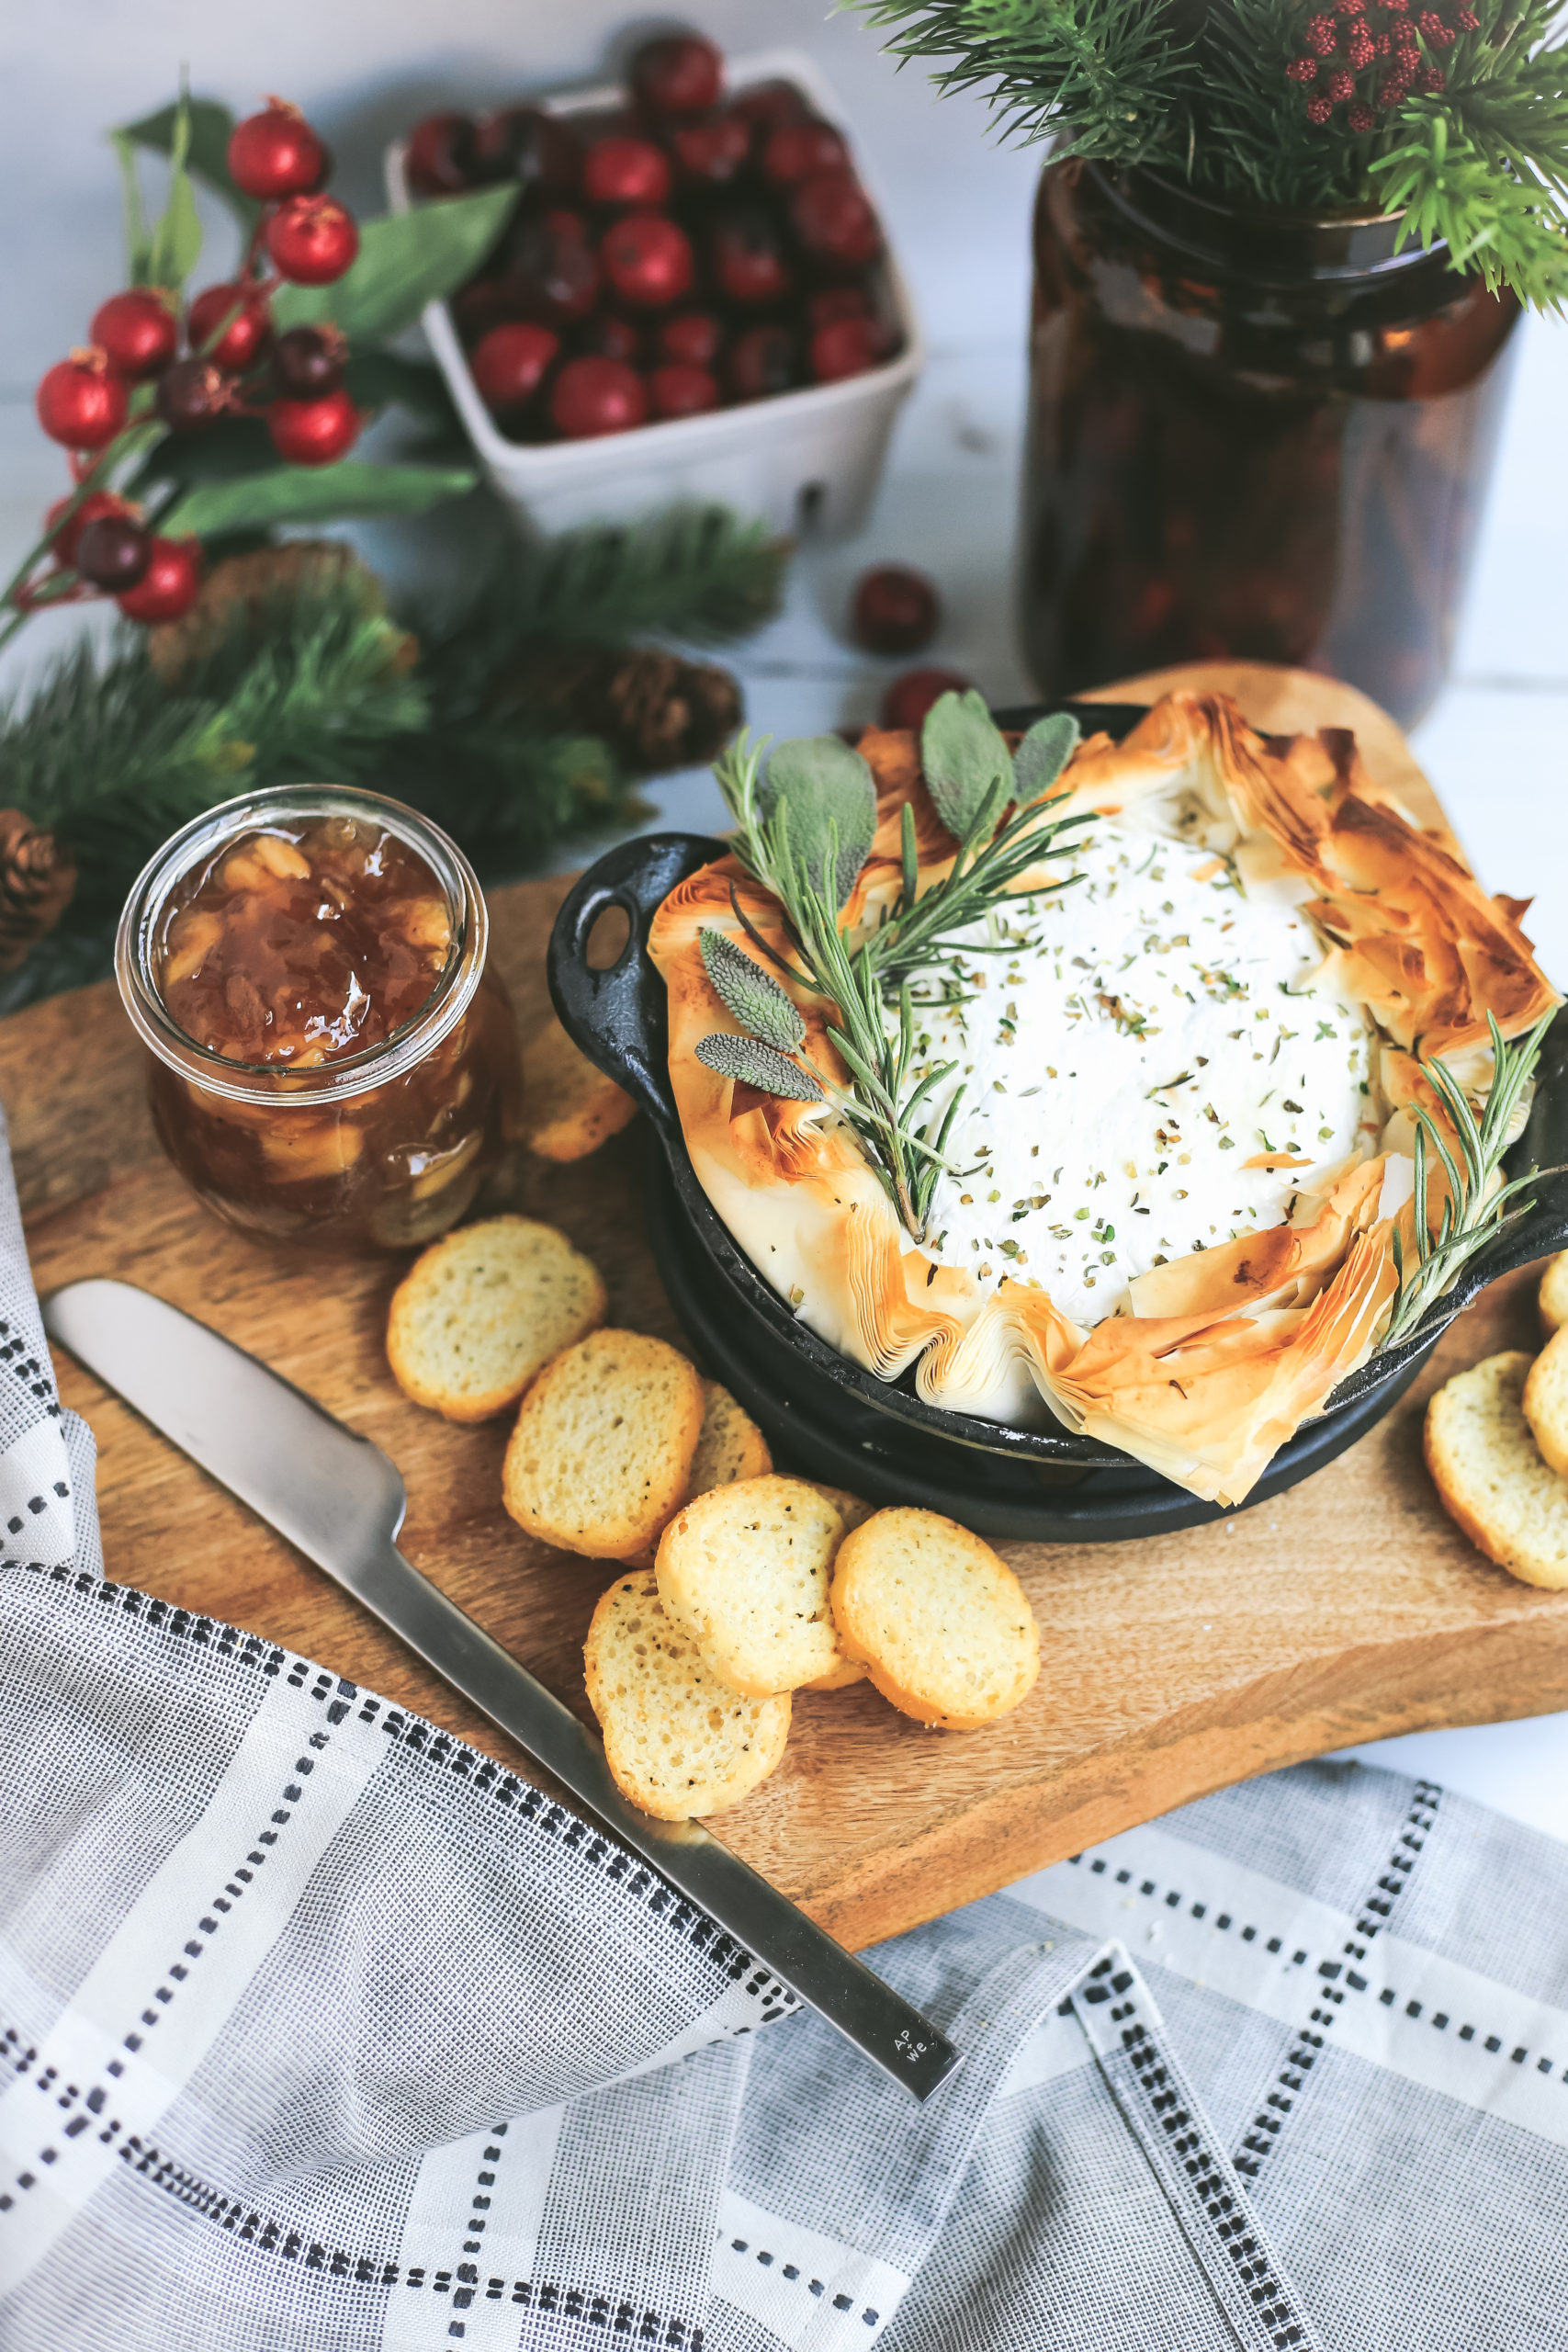 Easy Baked Brie in phyllo dough with savory herbs, peach jam, and seasonal winter decor, served in a small cast iron skillet